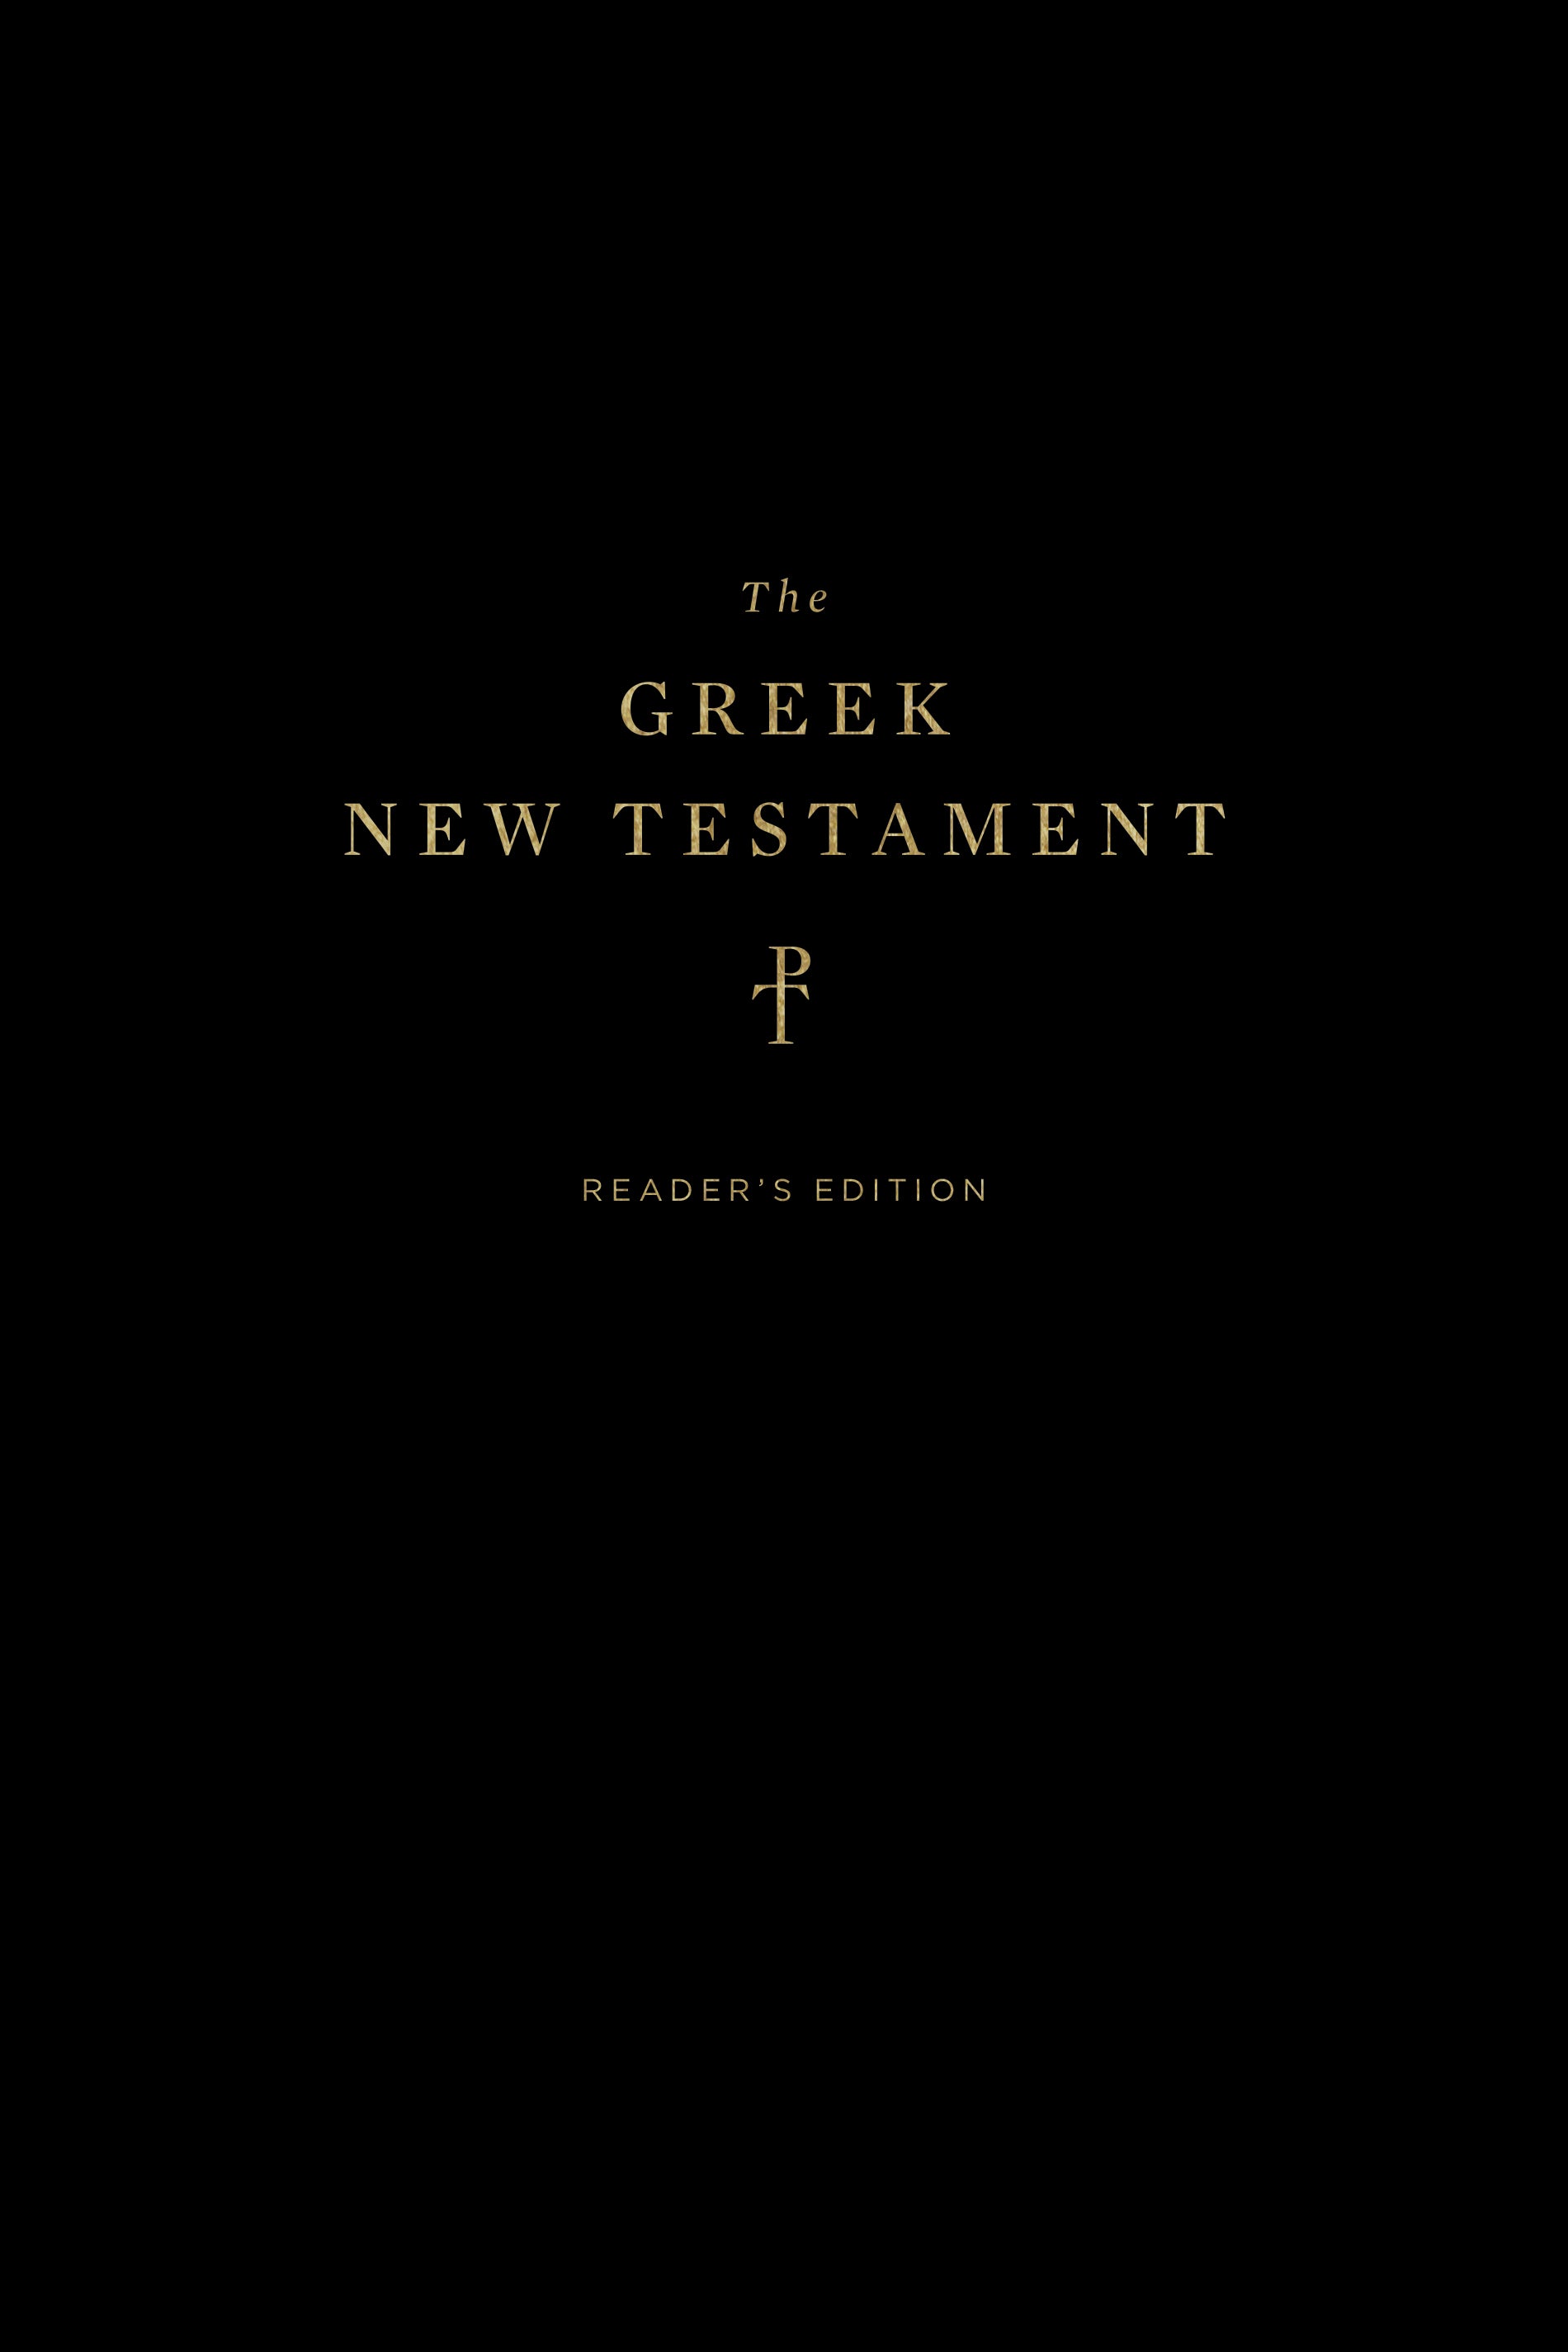 Image of The Greek New Testament, Produced at Tyndale House, Cambridge, Reader's Edition other